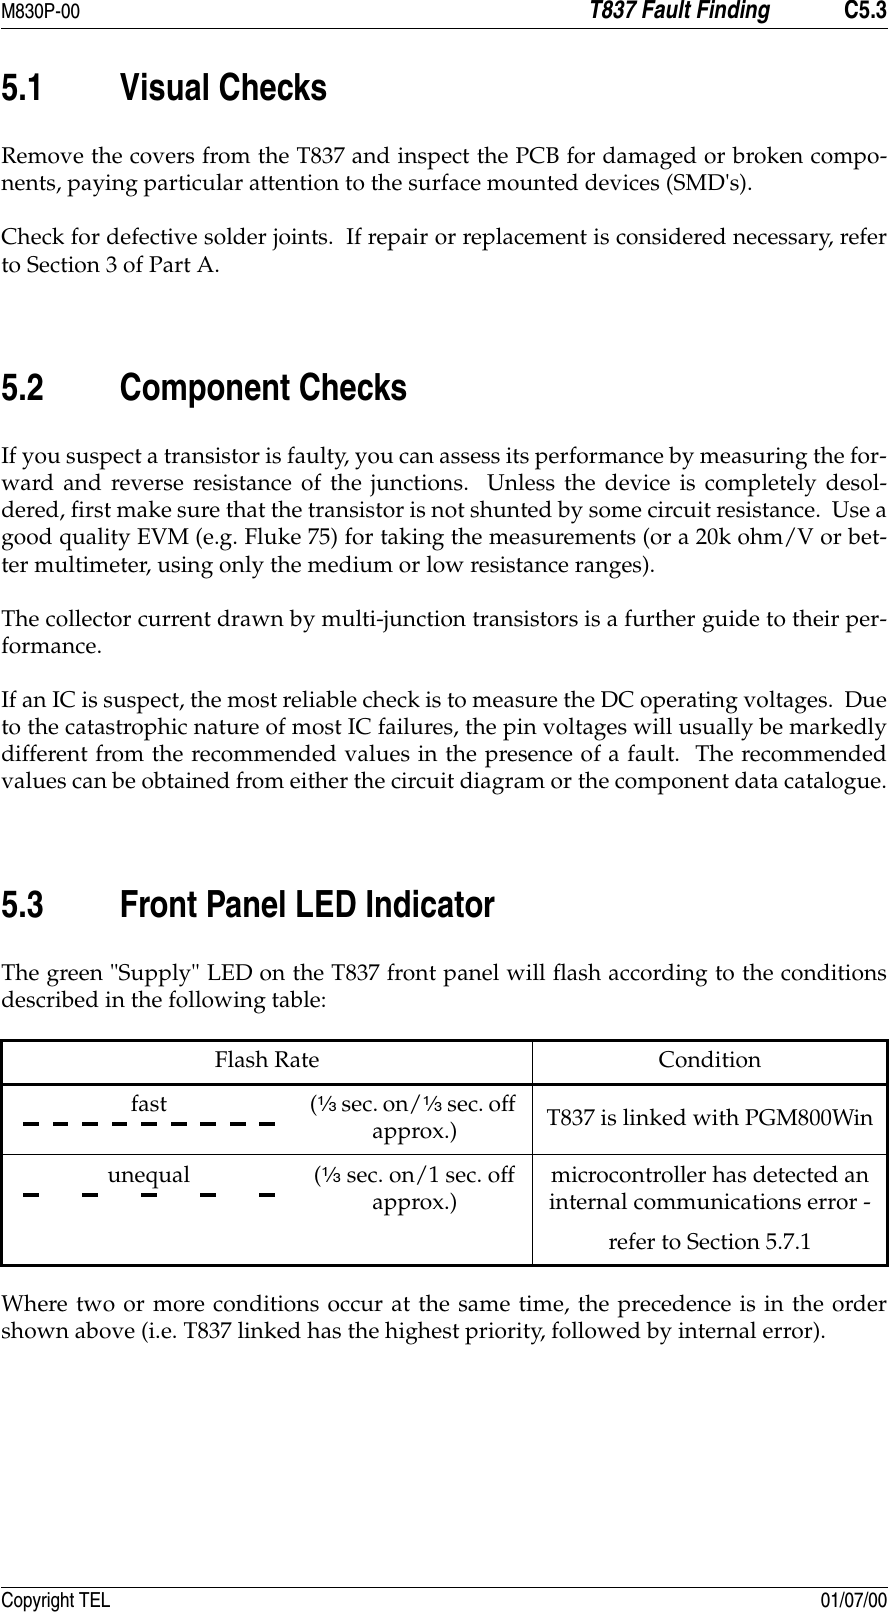 M830P-00 T837 Fault Finding C5.3Copyright TEL 01/07/005.1 Visual ChecksRemove the covers from the T837 and inspect the PCB for damaged or broken compo-nents, paying particular attention to the surface mounted devices (SMD&apos;s).Check for defective solder joints.  If repair or replacement is considered necessary, referto Section 3 of Part A.5.2 Component ChecksIf you suspect a transistor is faulty, you can assess its performance by measuring the for-ward and reverse resistance of the junctions.  Unless the device is completely desol-dered, first make sure that the transistor is not shunted by some circuit resistance.  Use agood quality EVM (e.g. Fluke 75) for taking the measurements (or a 20k ohm/V or bet-ter multimeter, using only the medium or low resistance ranges).The collector current drawn by multi-junction transistors is a further guide to their per-formance.If an IC is suspect, the most reliable check is to measure the DC operating voltages.  Dueto the catastrophic nature of most IC failures, the pin voltages will usually be markedlydifferent from the recommended values in the presence of a fault.  The recommendedvalues can be obtained from either the circuit diagram or the component data catalogue.5.3 Front Panel LED IndicatorThe green &quot;Supply&quot; LED on the T837 front panel will flash according to the conditionsdescribed in the following table:Where two or more conditions occur at the same time, the precedence is in the ordershown above (i.e. T837 linked has the highest priority, followed by internal error).Flash Rate Conditionfast (D sec. on/D sec. off approx.) T837 is linked with PGM800Winunequal (D sec. on/1 sec. off approx.)microcontroller has detected an internal communications error -refer to Section 5.7.1